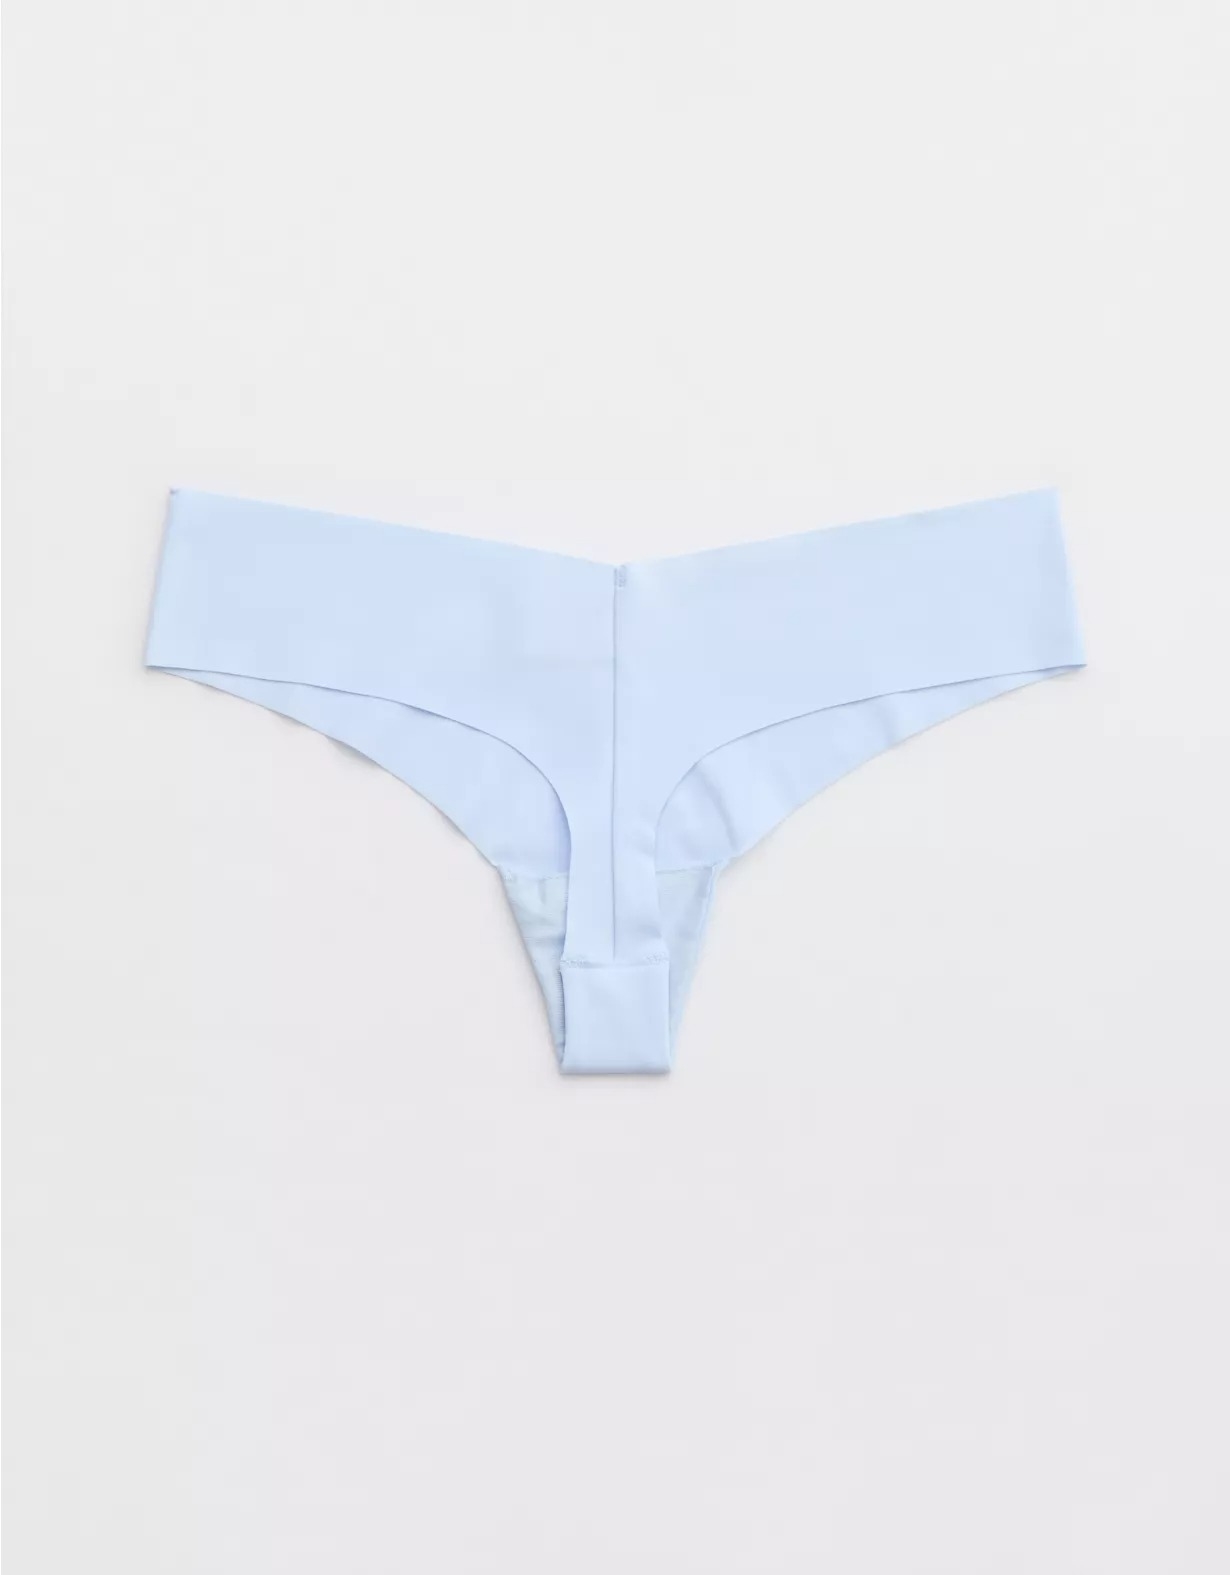 Light blue thong with a seamless design, featuring a wide waistband and minimal stitching for comfort and a smooth fit